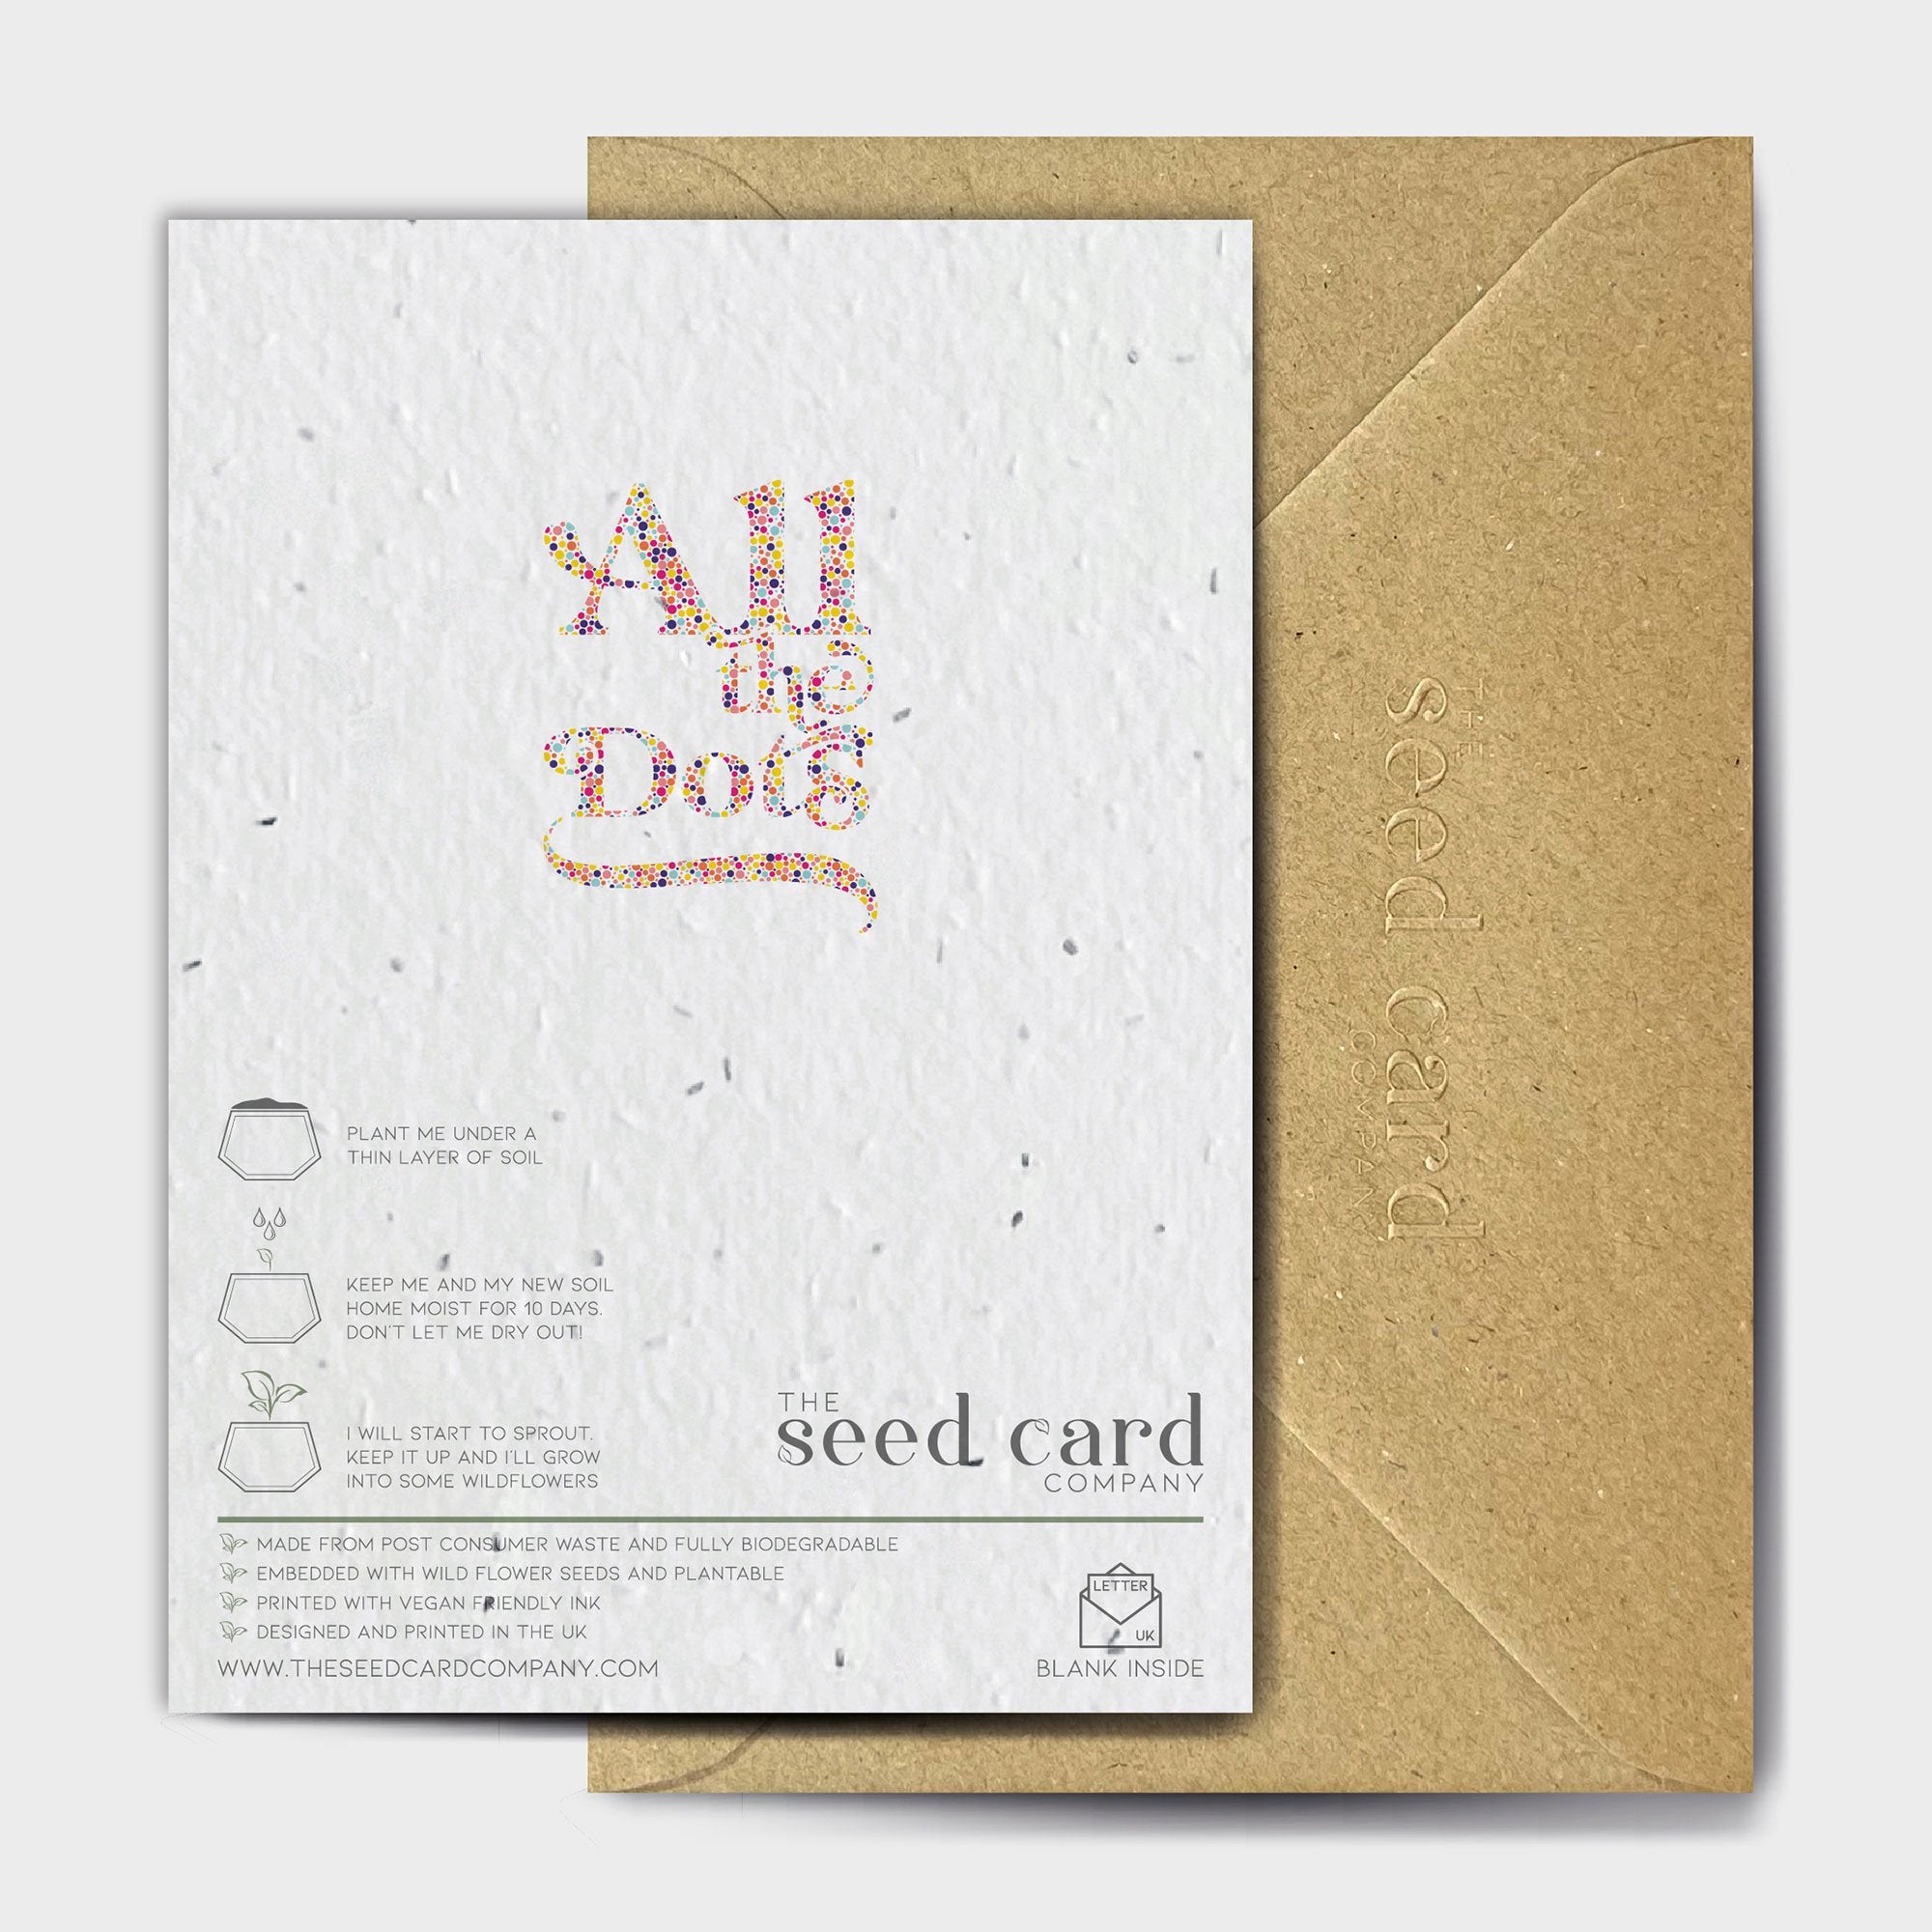 Shop online Mum In A Million Dots - 100% biodegradable seed-embedded cards Shop -The Seed Card Company